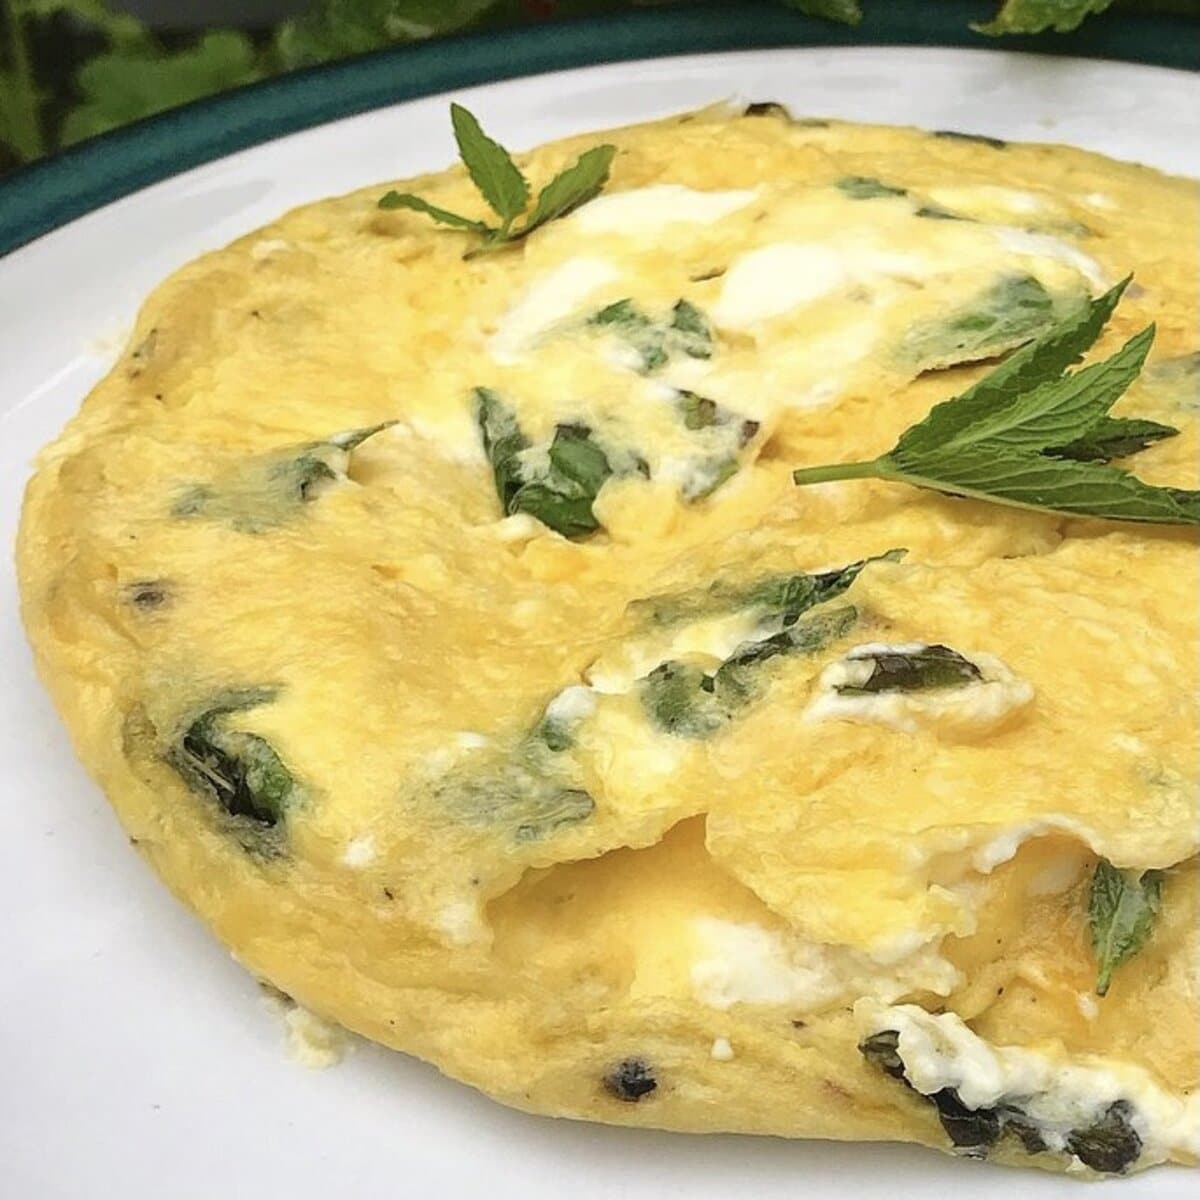 Corsican mint omelet on a plate.